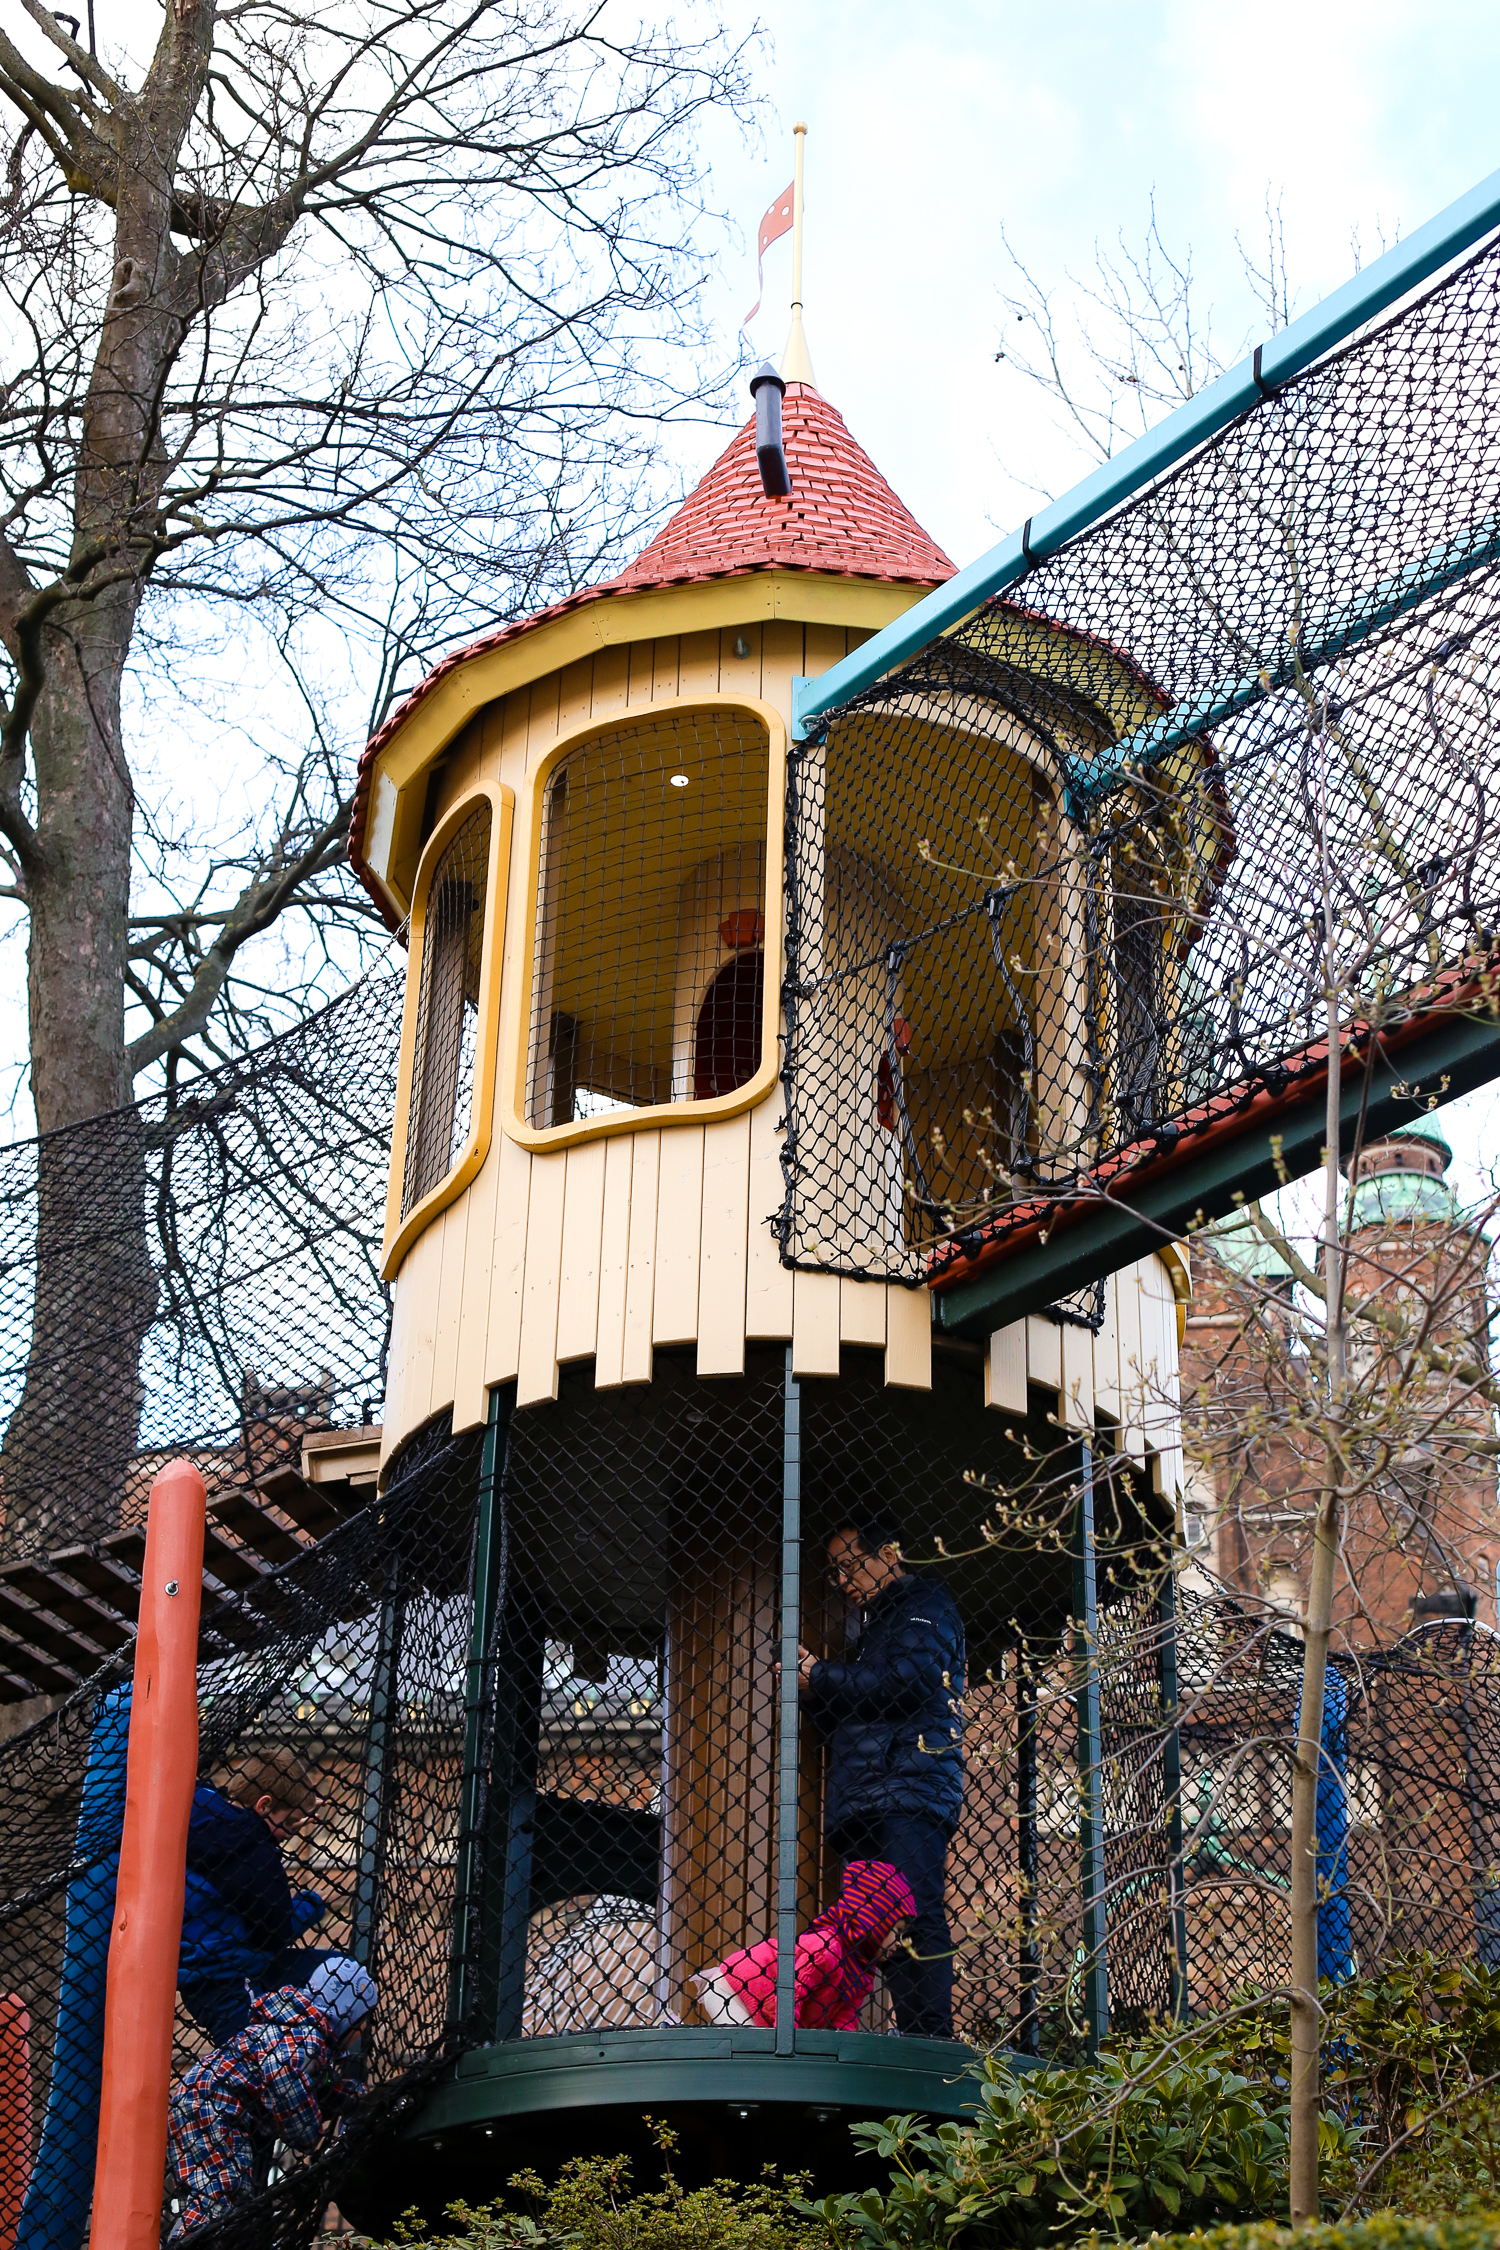 Don't miss out on taking your kids to the children's playground at Tivoli Gardens in Copenhagen, Denmark - it's full of surprises!